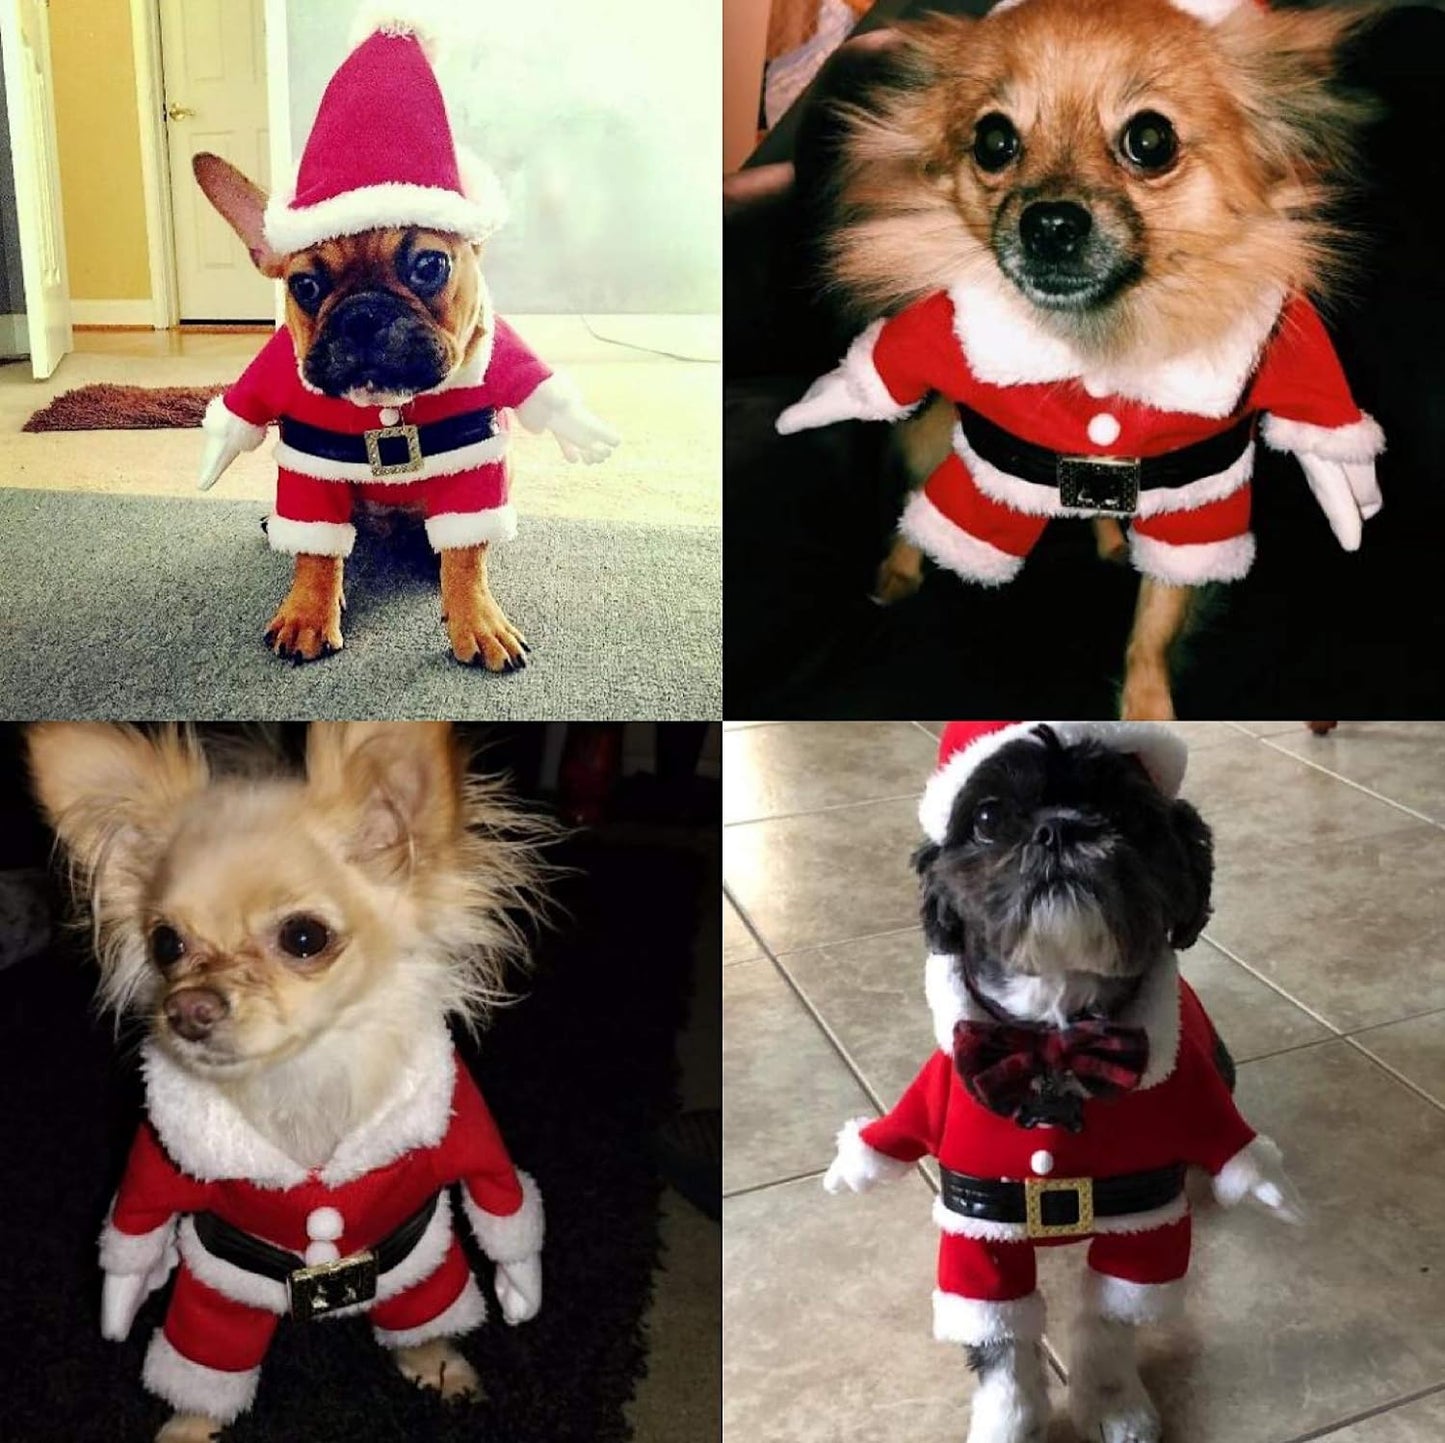 Dog Christmas Costumes with Hat Dog Santa Costume Dog Xmas Costume for Small Dog Cat Puppy (Red,M)